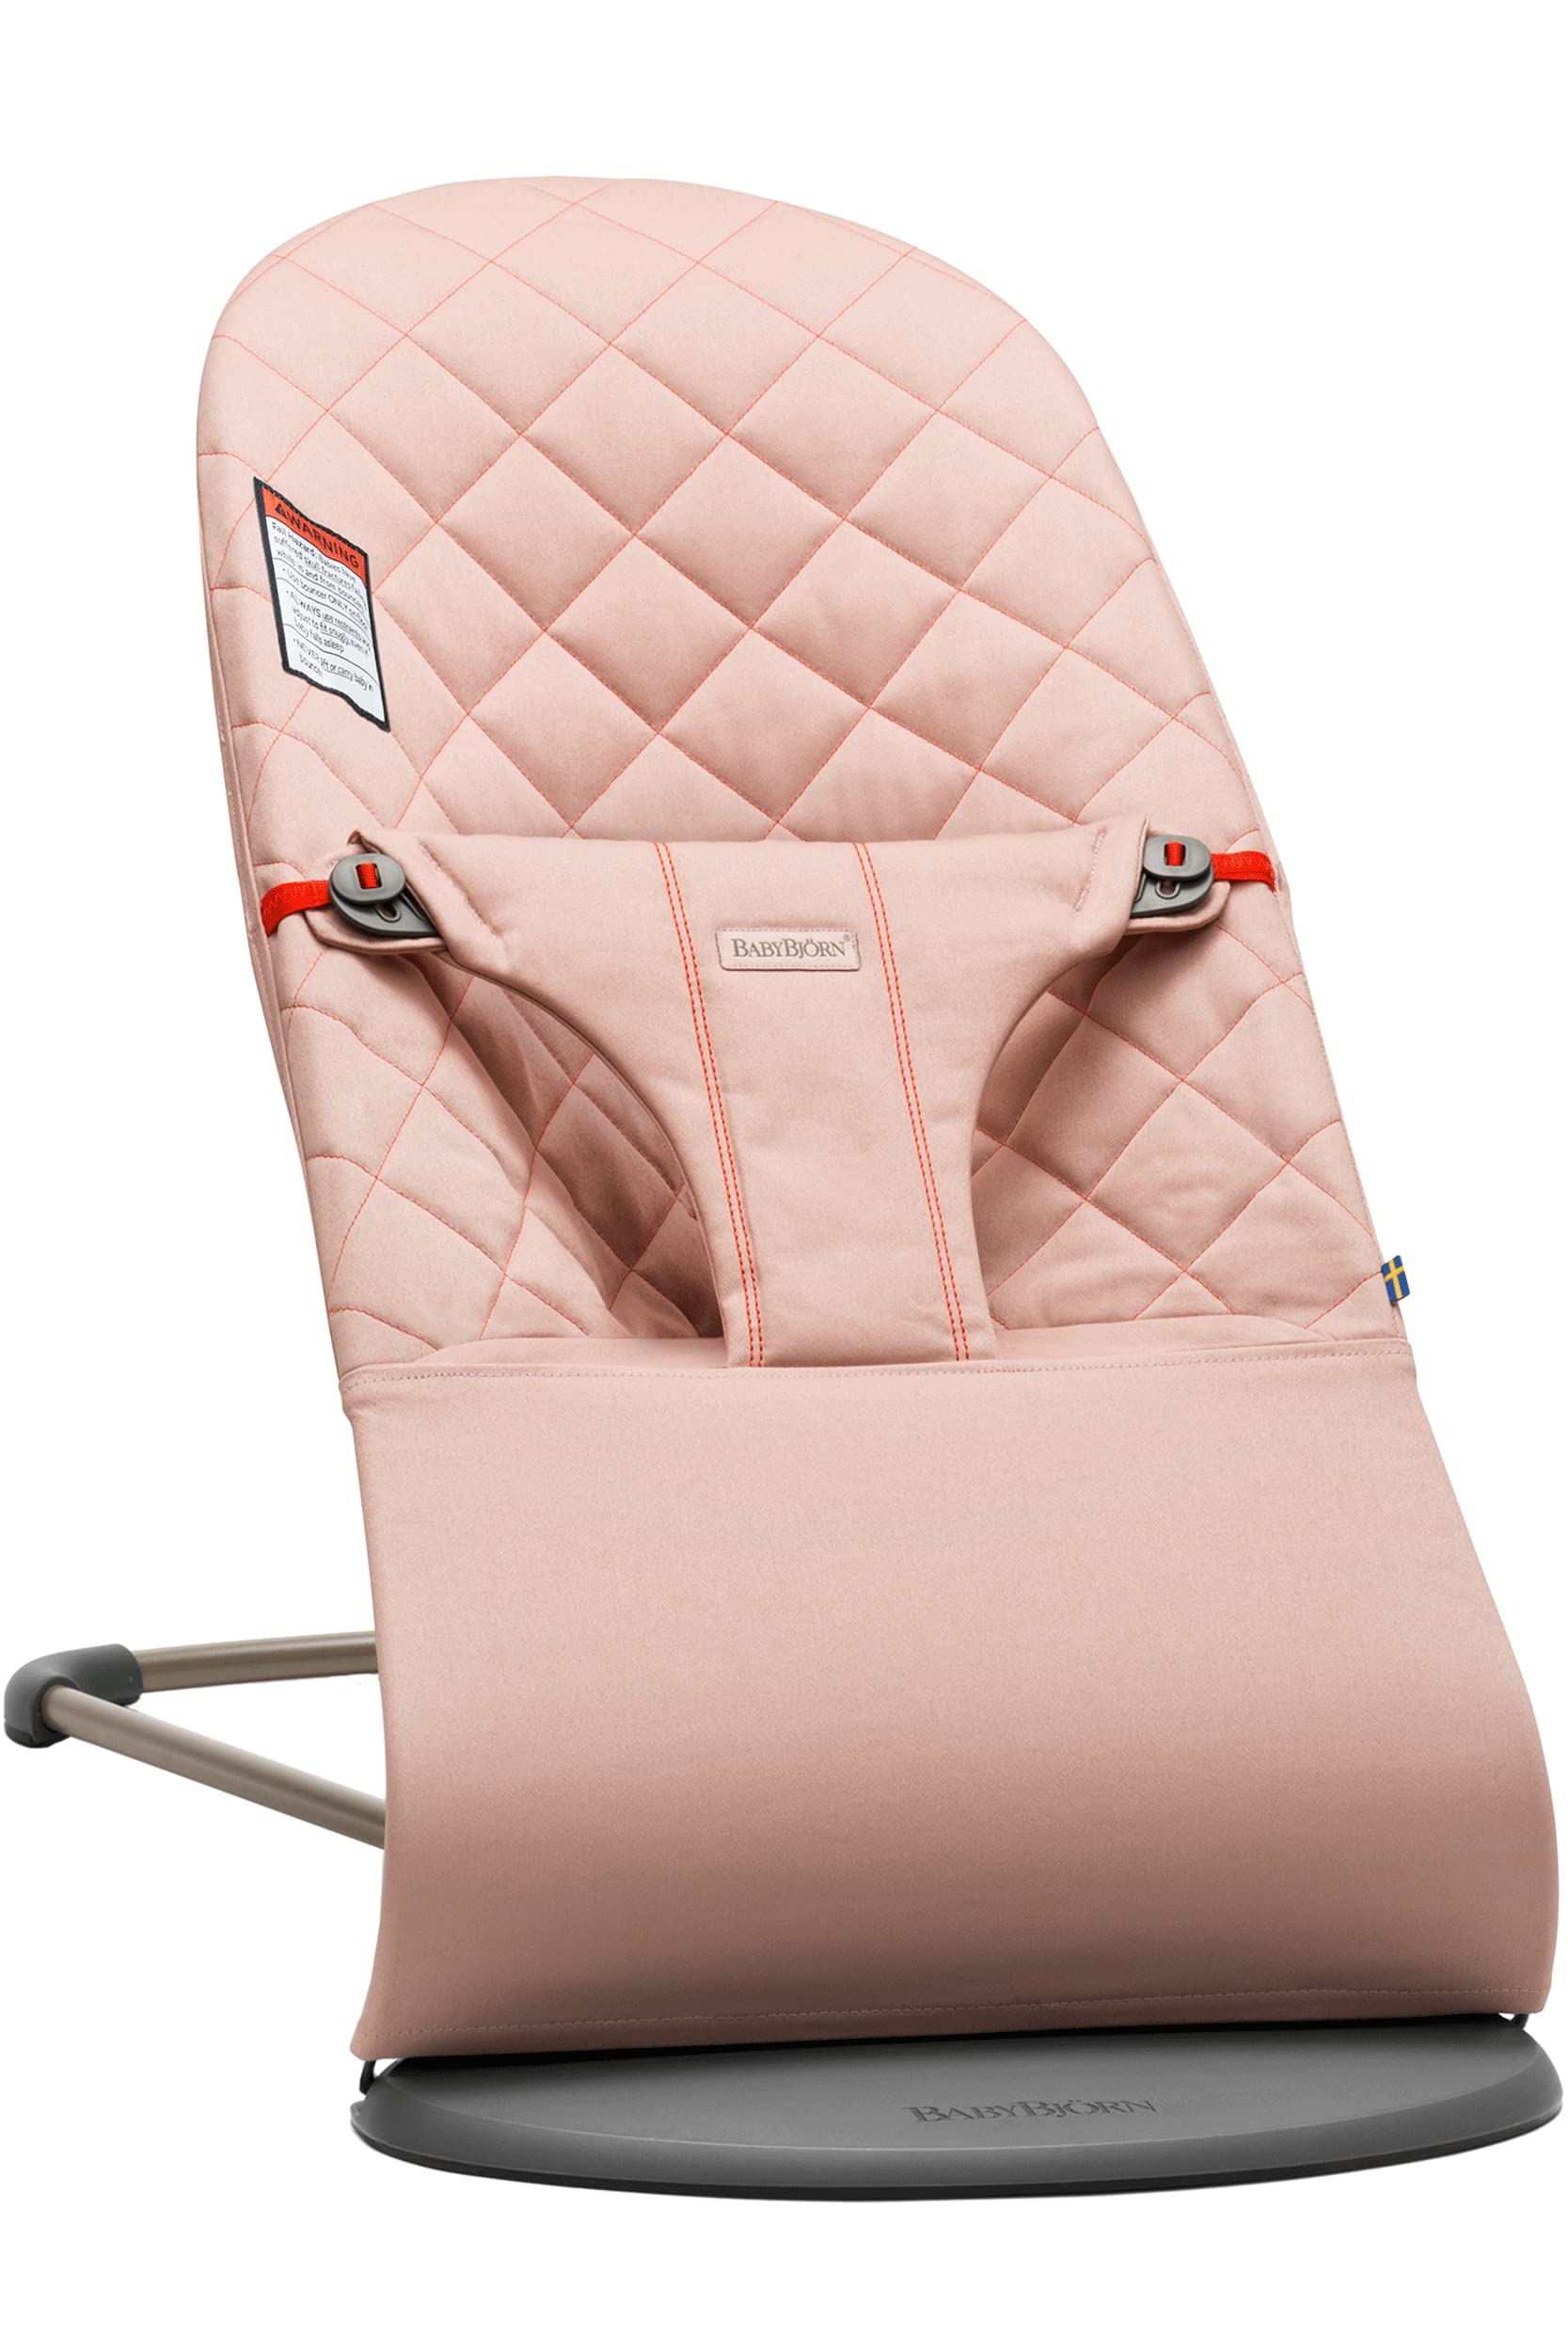 BABYBJORN Bouncer Bliss, Old Rose, Cotton